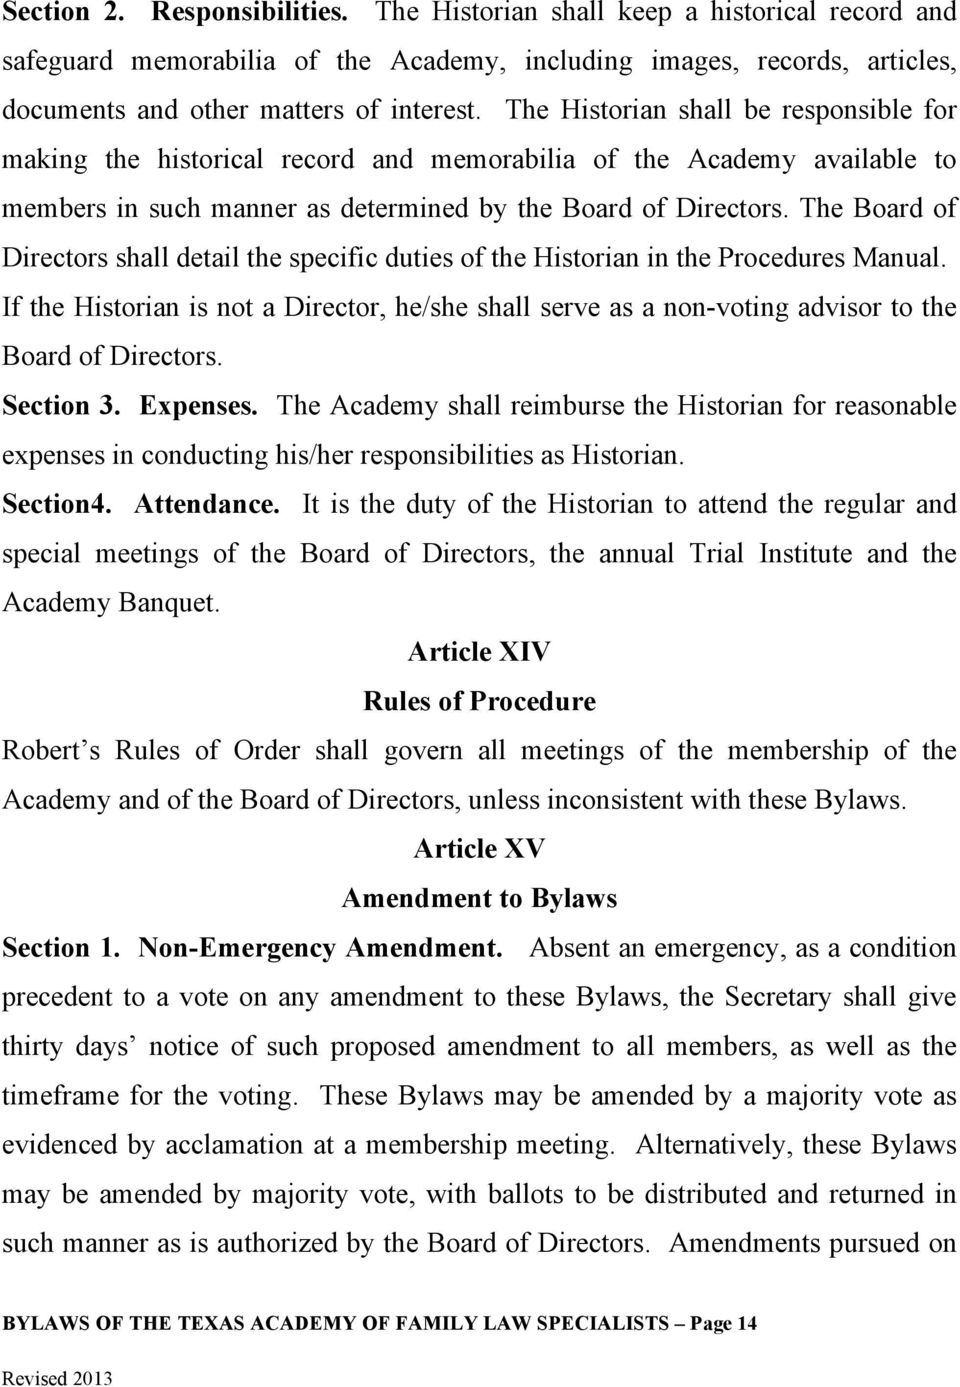 The Board of Directors shall detail the specific duties of the Historian in the Procedures Manual.